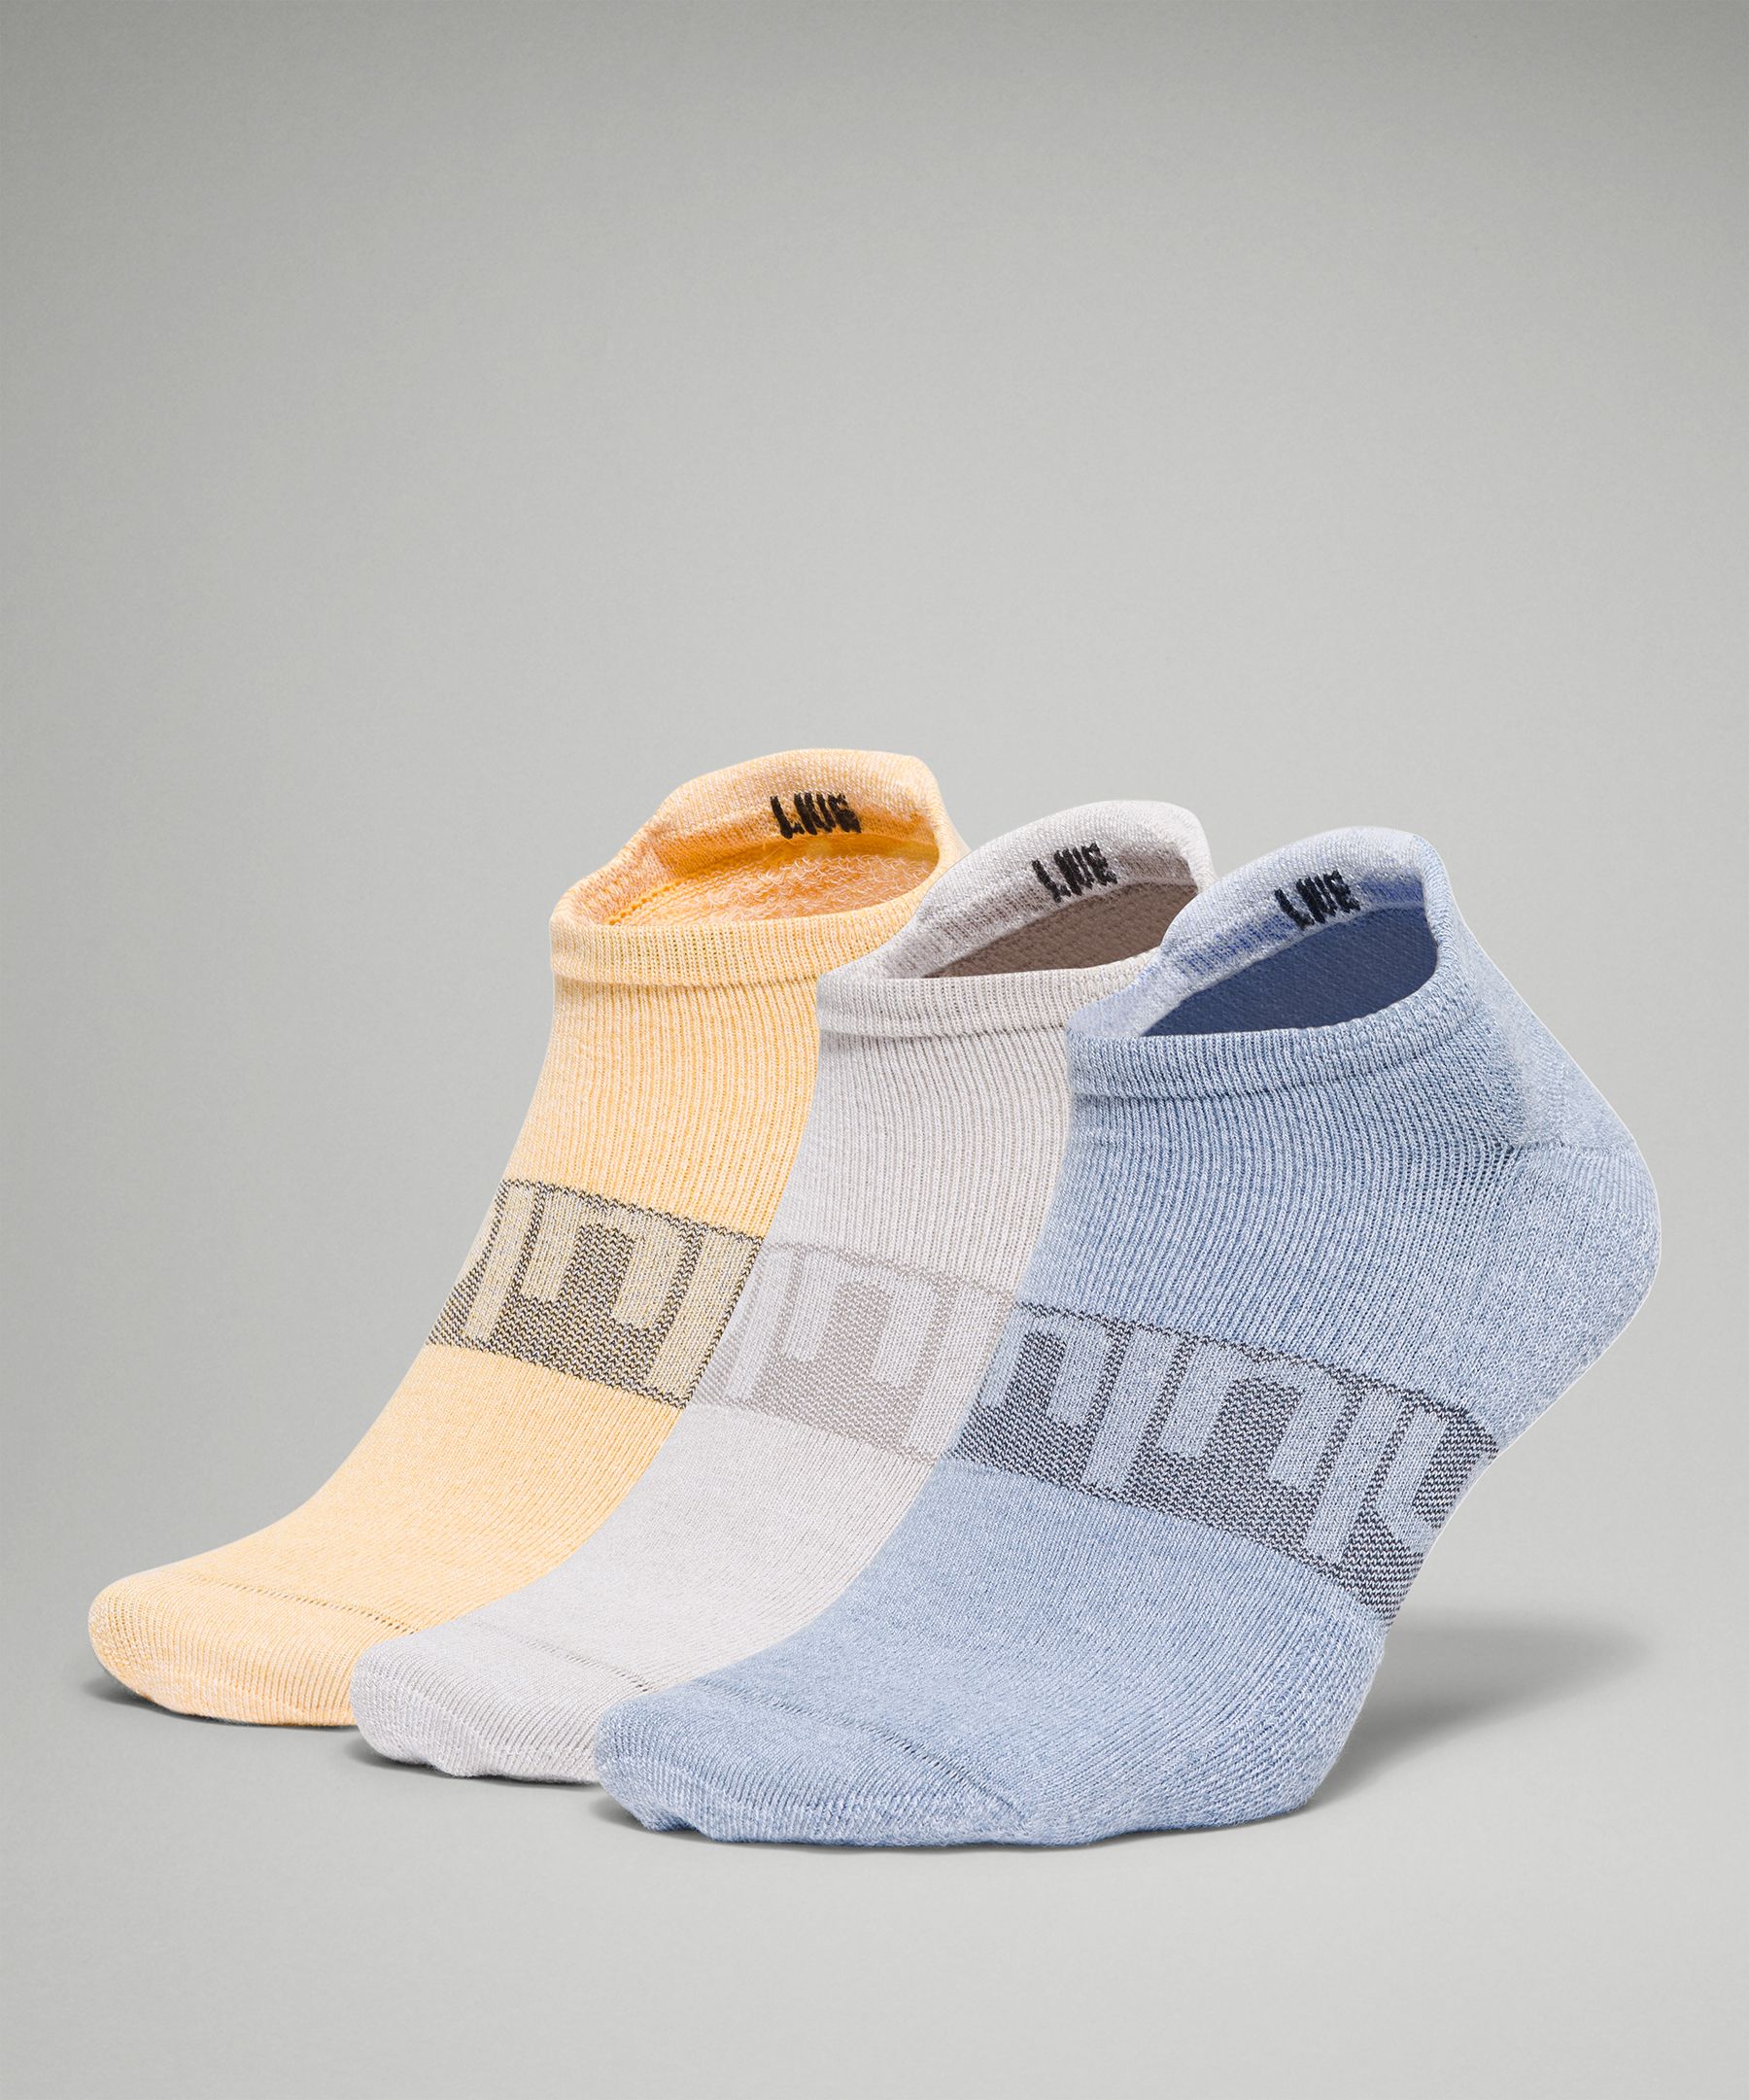 Lululemon Daily Stride Low Ankle Sock *3 Pack In River Blue/raw Linen/wheat Yellow